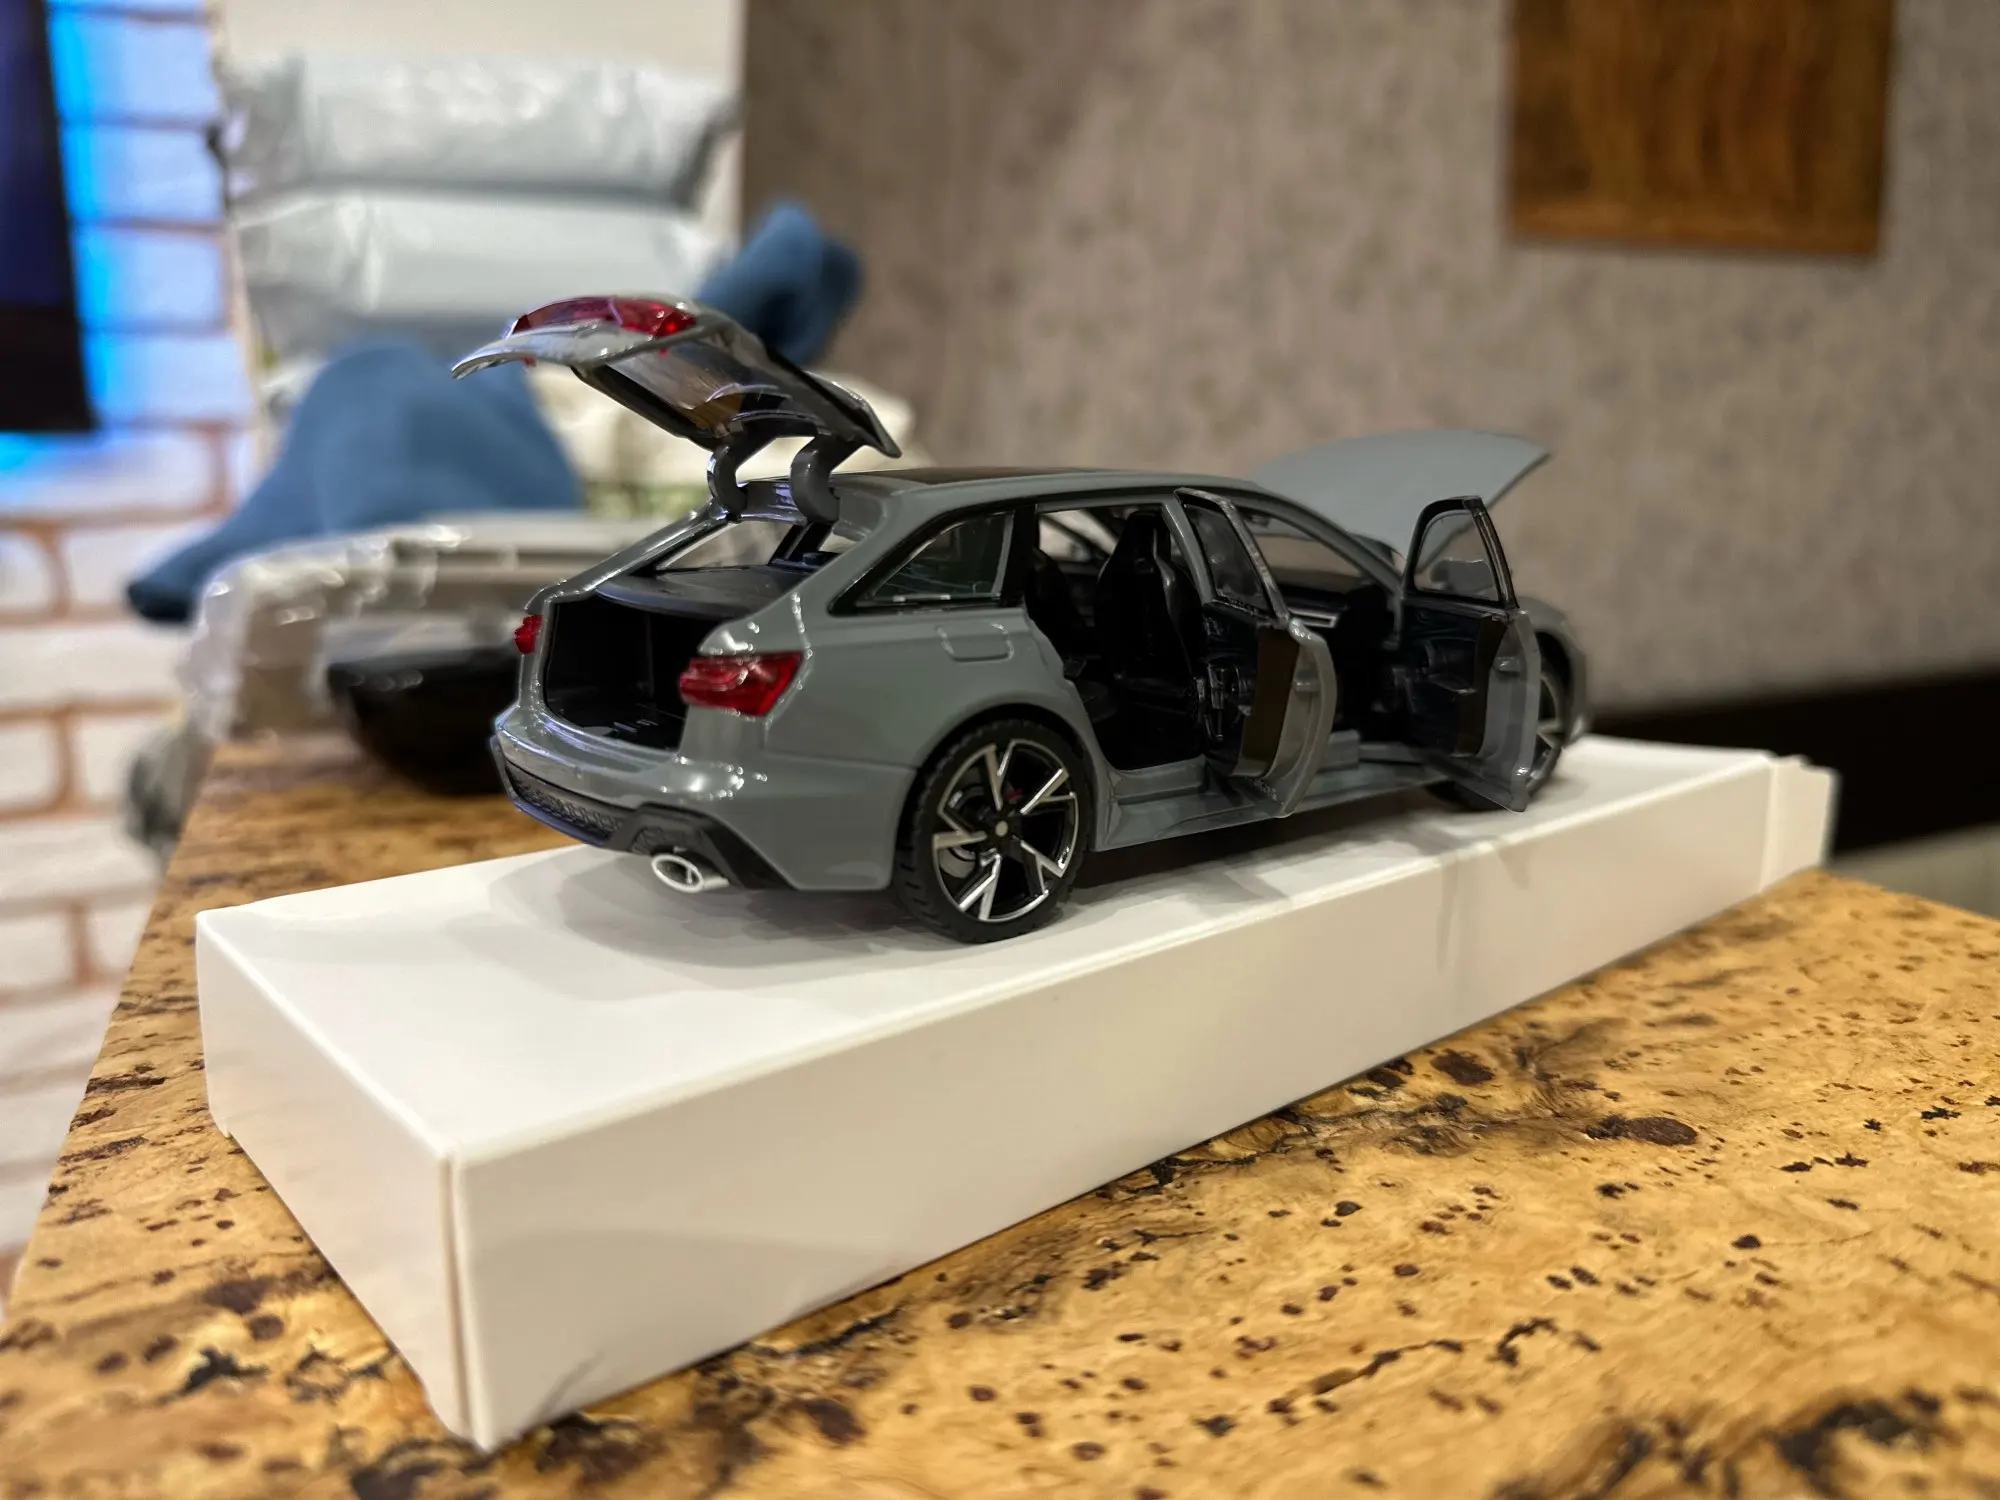 1/32 Audi RS6 Toy Car Model with Sound Light Doors Opened Alloy Diecast Model Vehicle Collection Toy for Boy Adult Festival Gift photo review